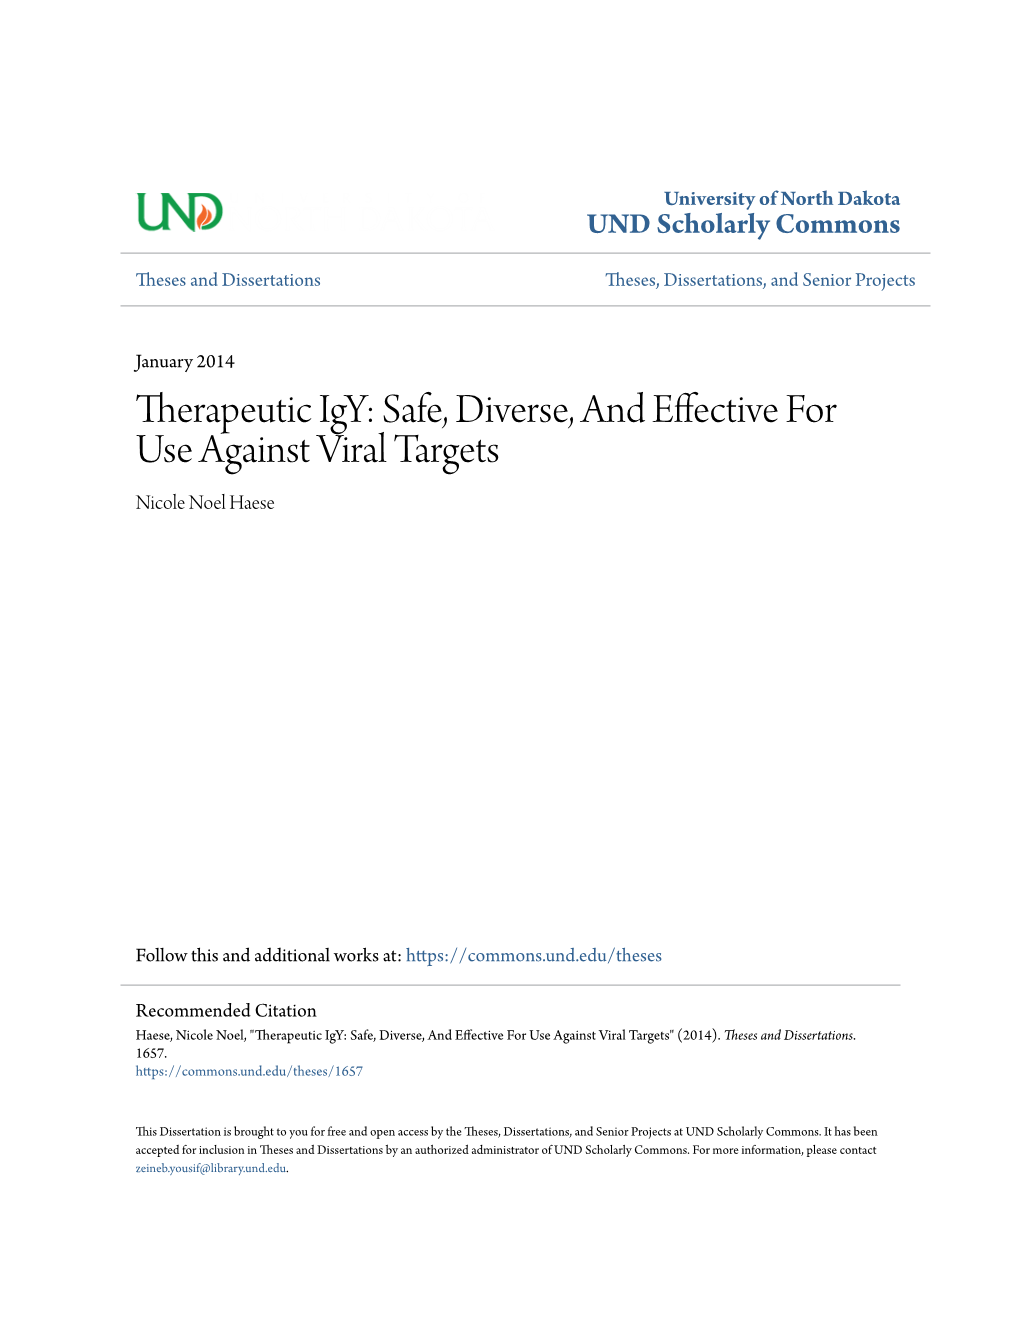 Therapeutic Igy: Safe, Diverse, and Effective for Use Against Viral Targets Nicole Noel Haese